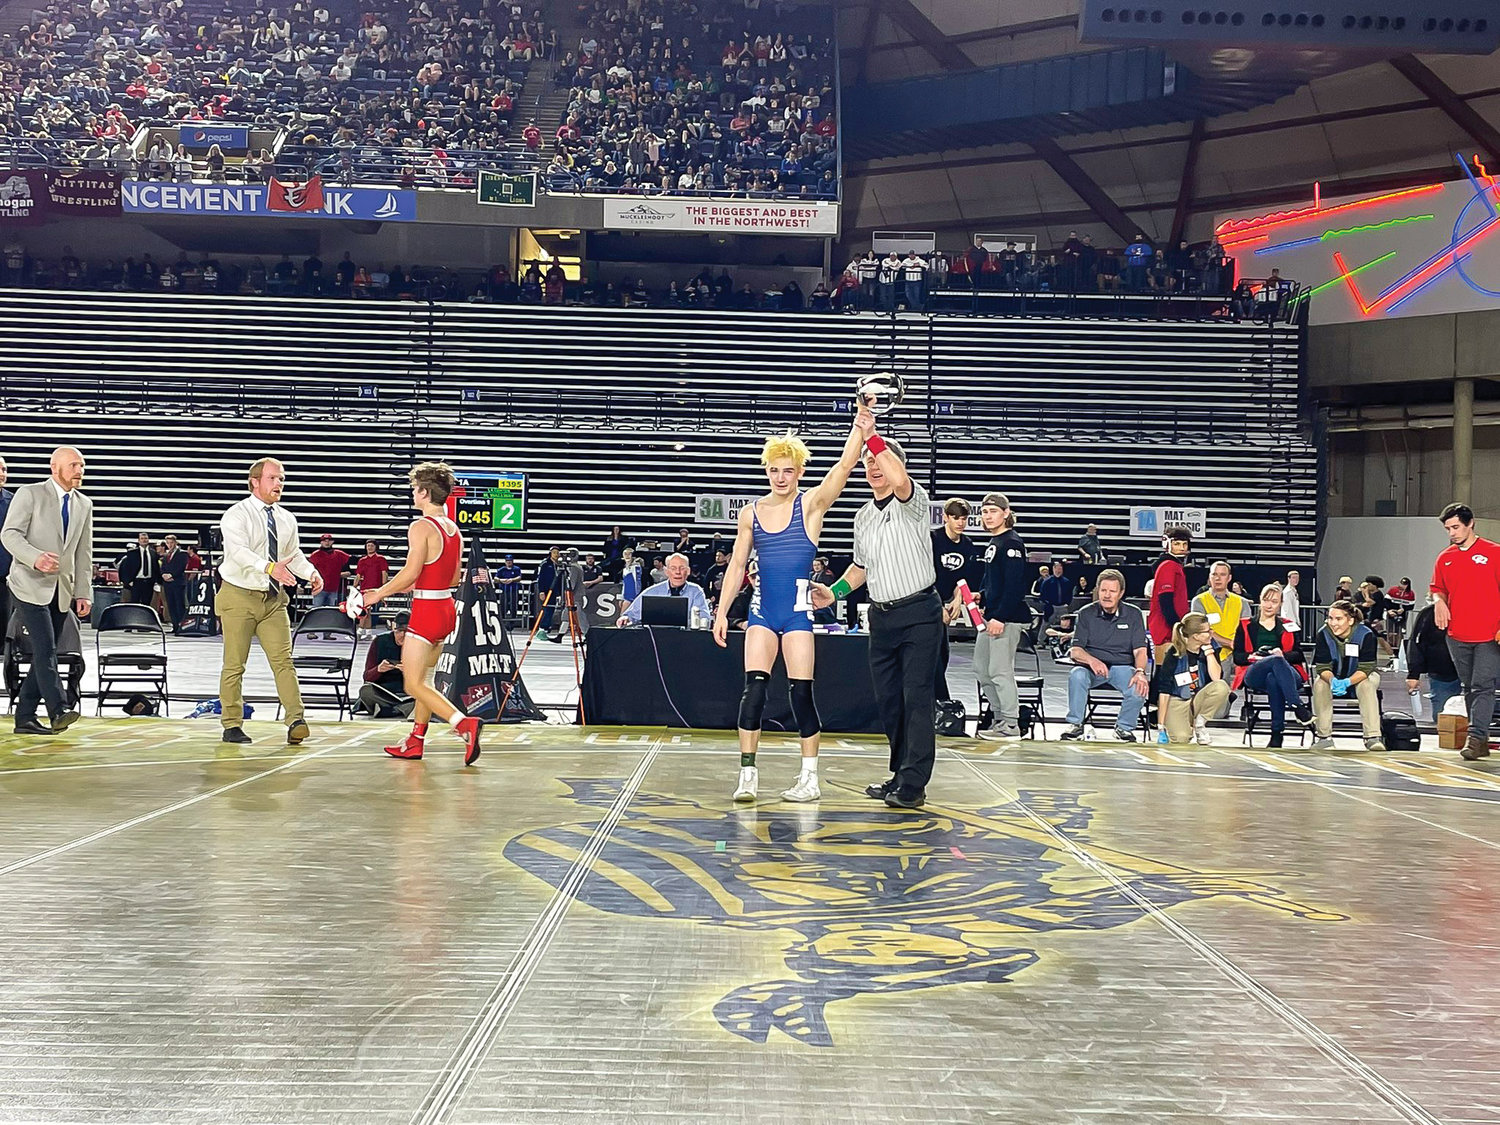 Malachi Wallway, of La Center High School, was named the 2023 WIAA 1A boys state championship wrestler in the 120-pound weight division on Saturday, Feb. 18, at the Mat Classic in Tacoma.